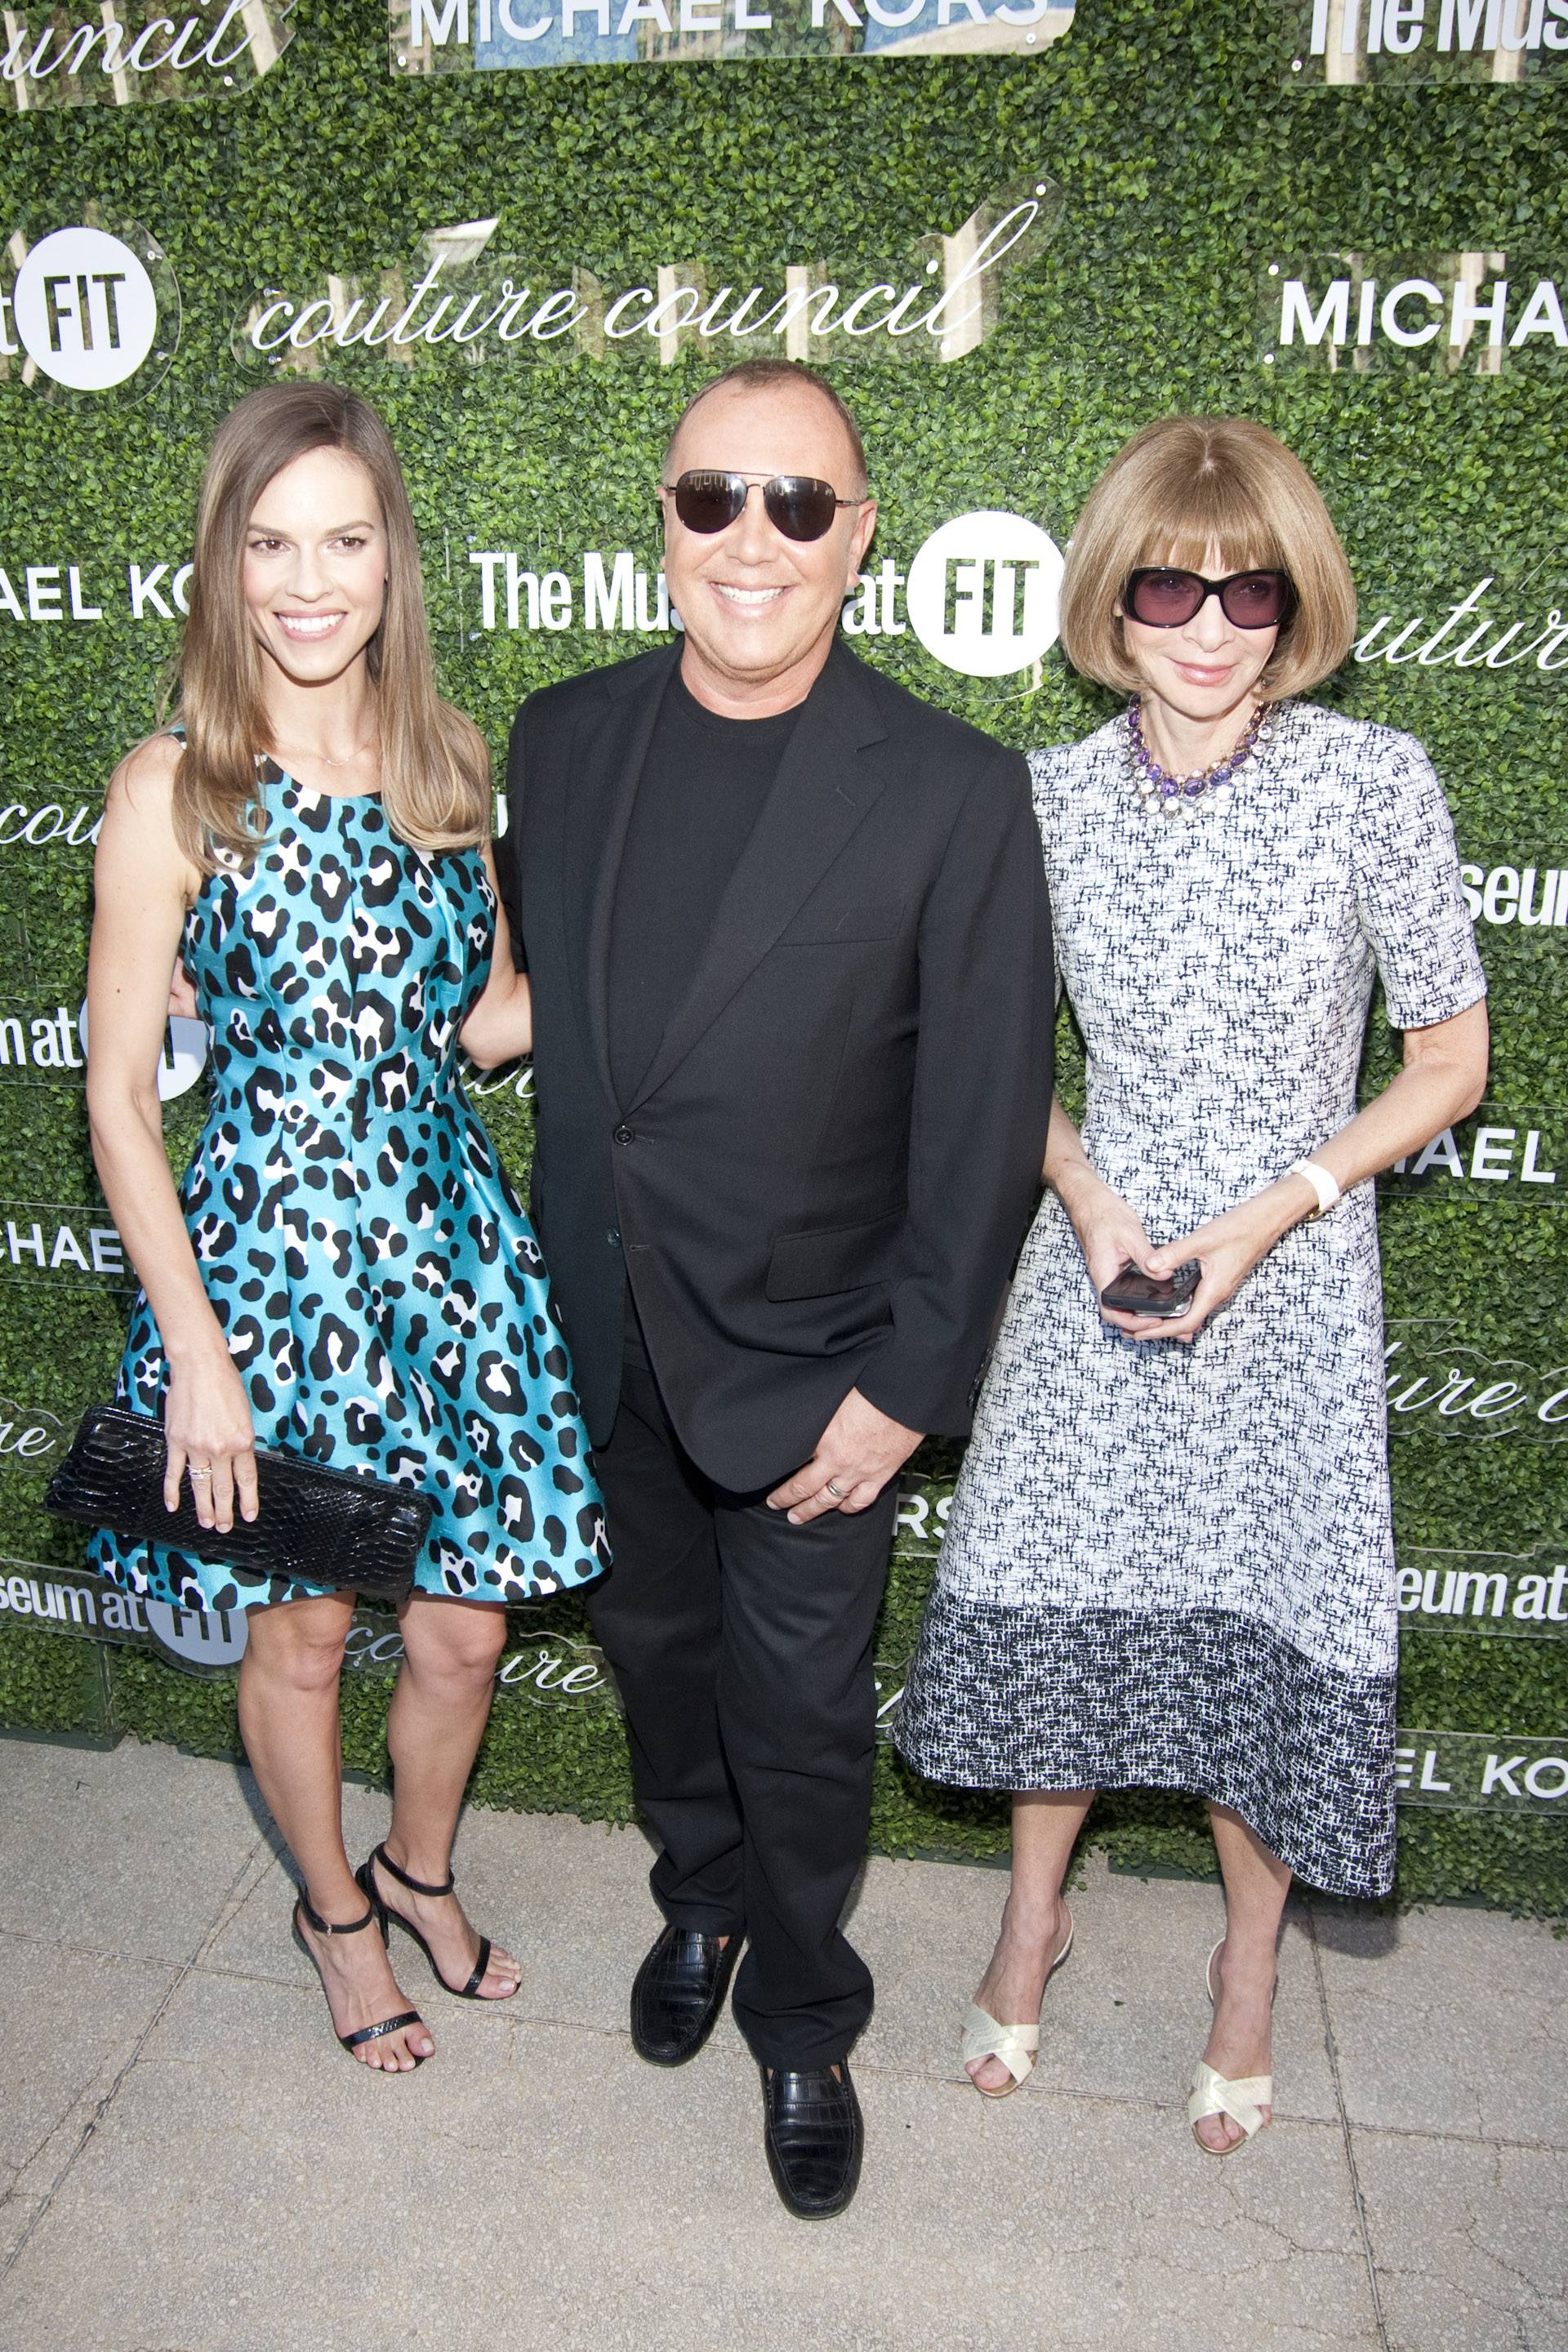 The COUTURE COUNCIL of the MUSEUM at FIT 7TH Annual Fashion Award Benefit Luncheon Honoring MICHAEL KORS